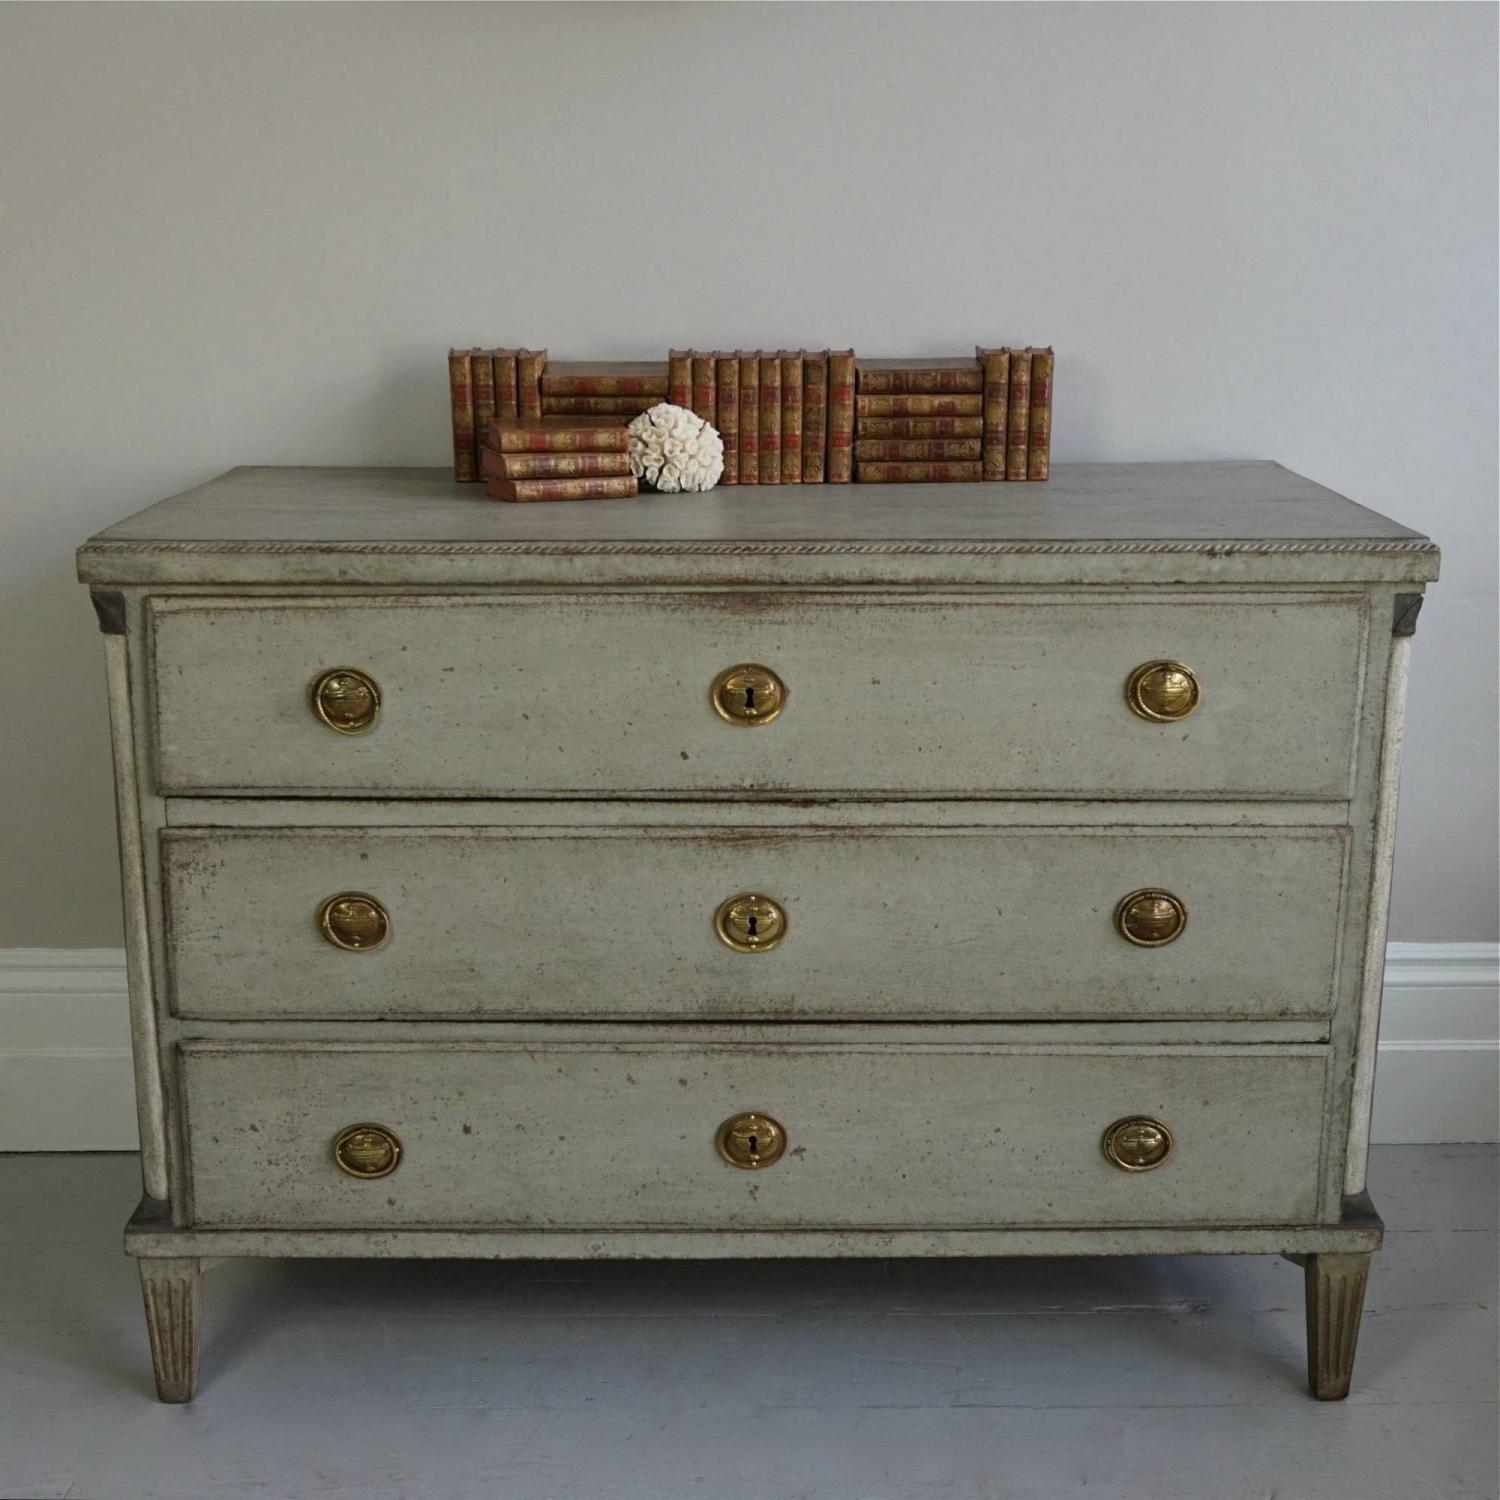 LARGE AND RICHLY CARVED DANISH GUSTAVIAN CHEST